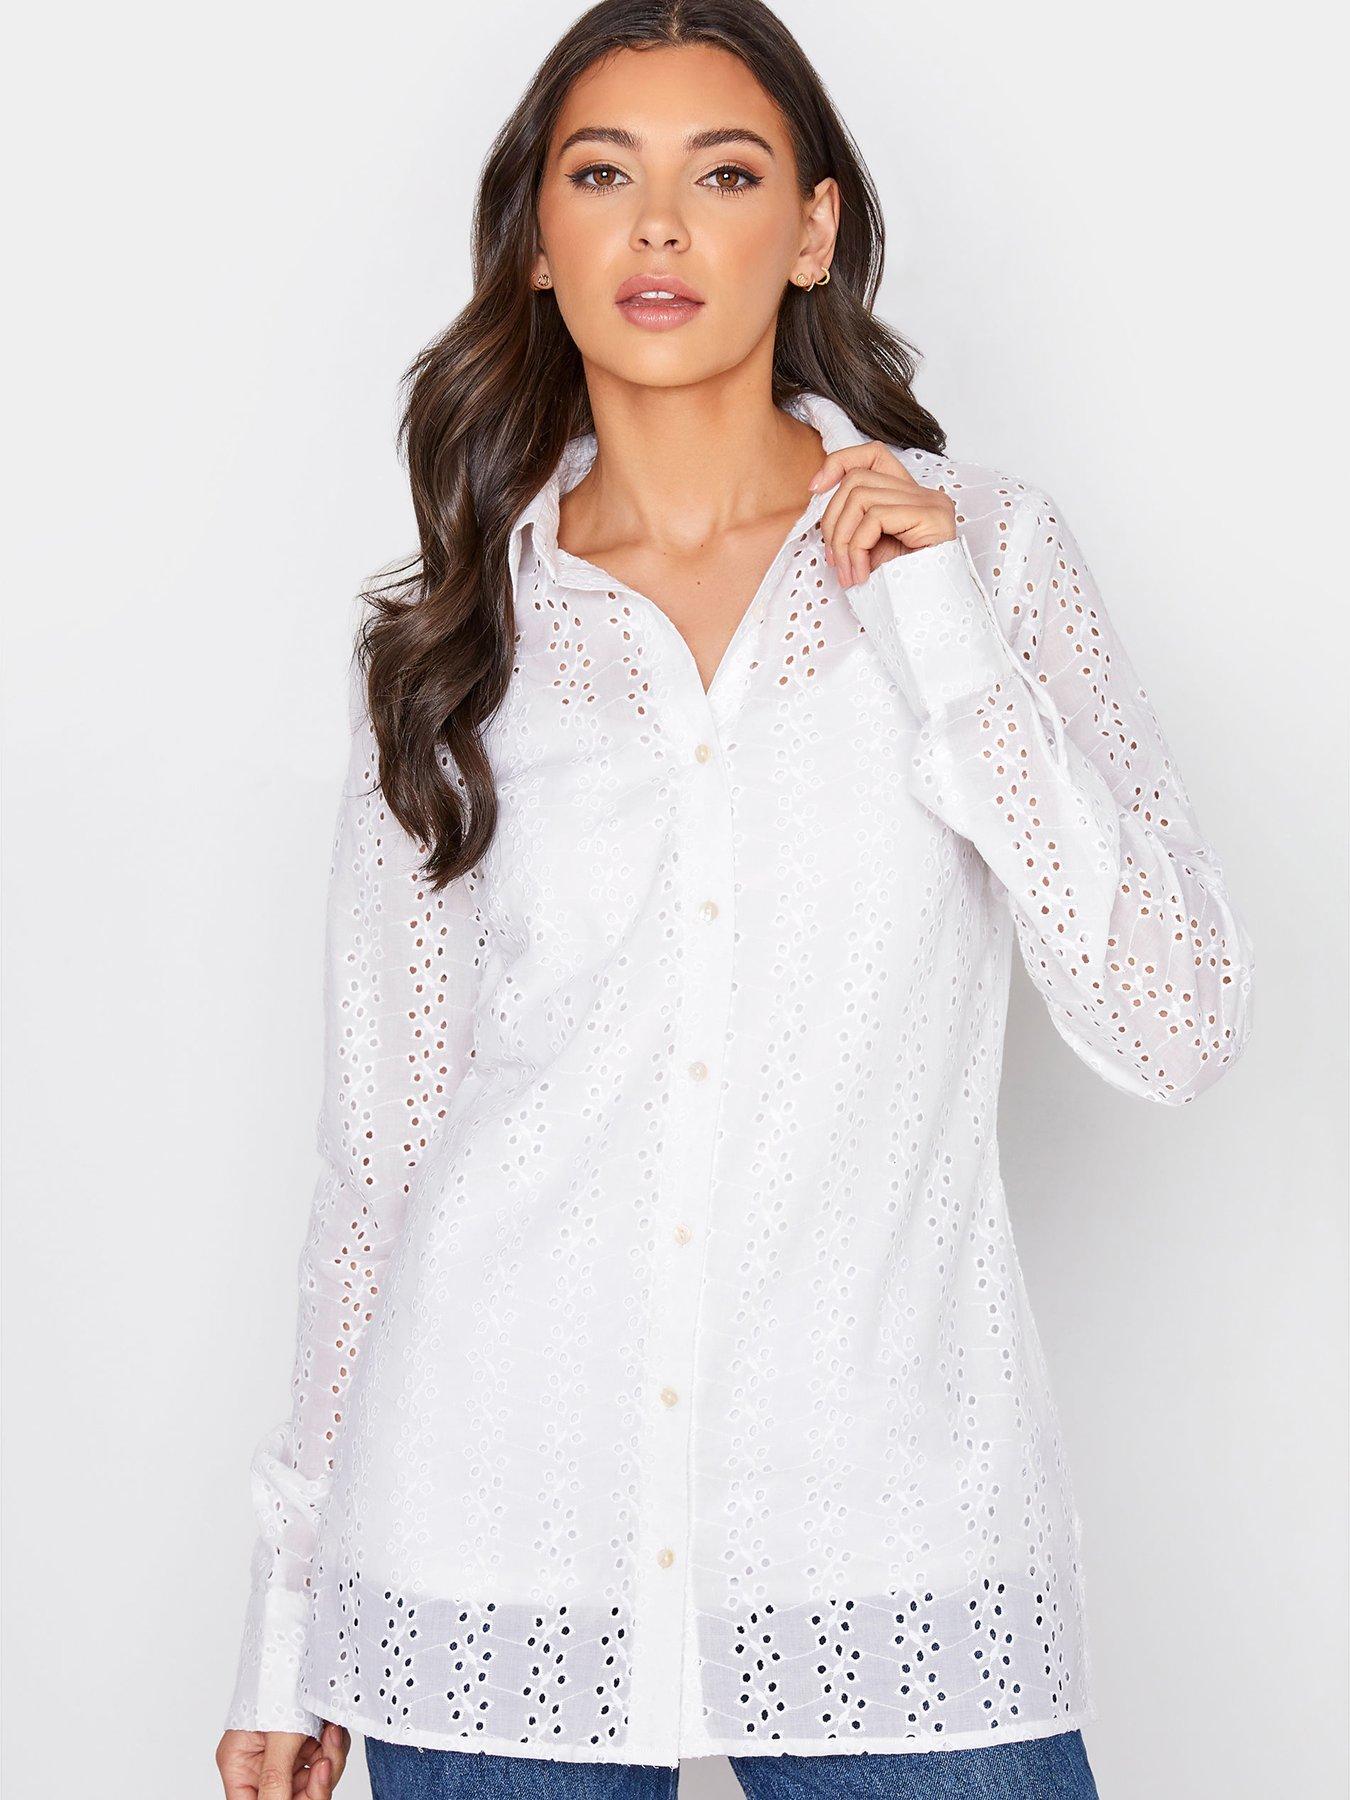 Blouses & shirts Broiderie Shirt - White